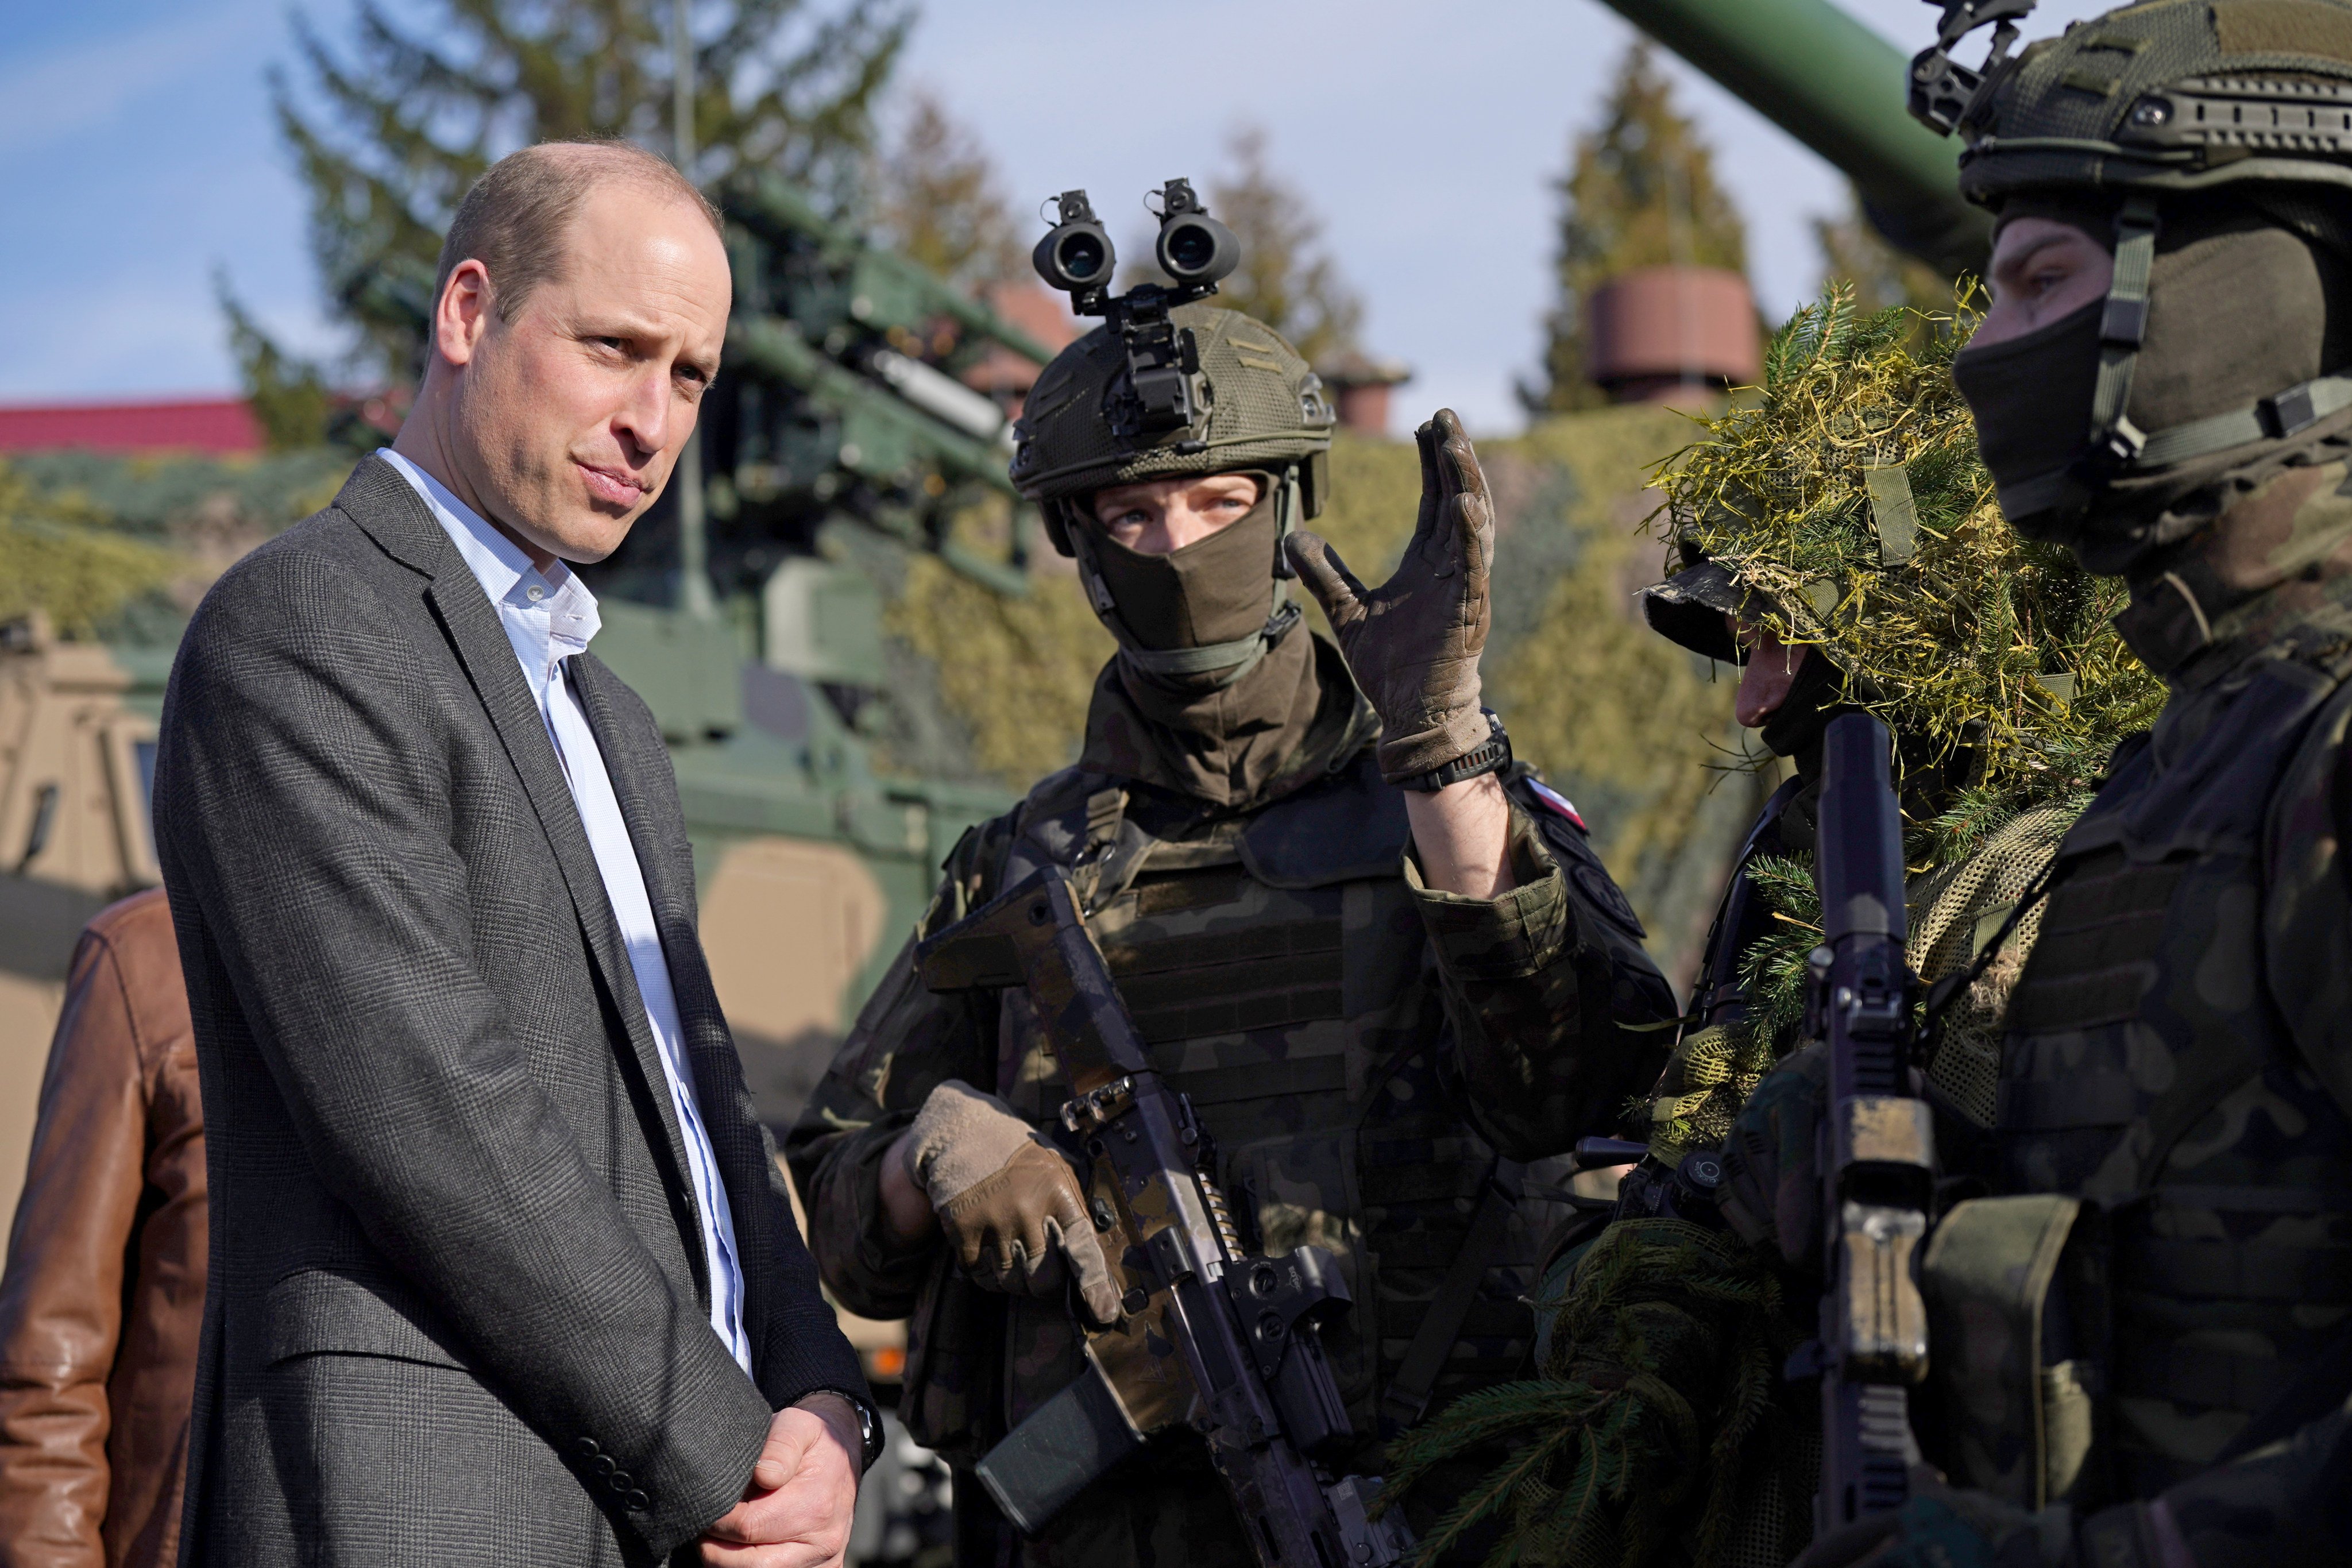 Britain’s Prince William meets members of the Polish military during a visit to the 3rd Brigade Territorial Defence Force base, that has been heavily involved in providing support to Ukraine. Photo: PA Wire / dpa